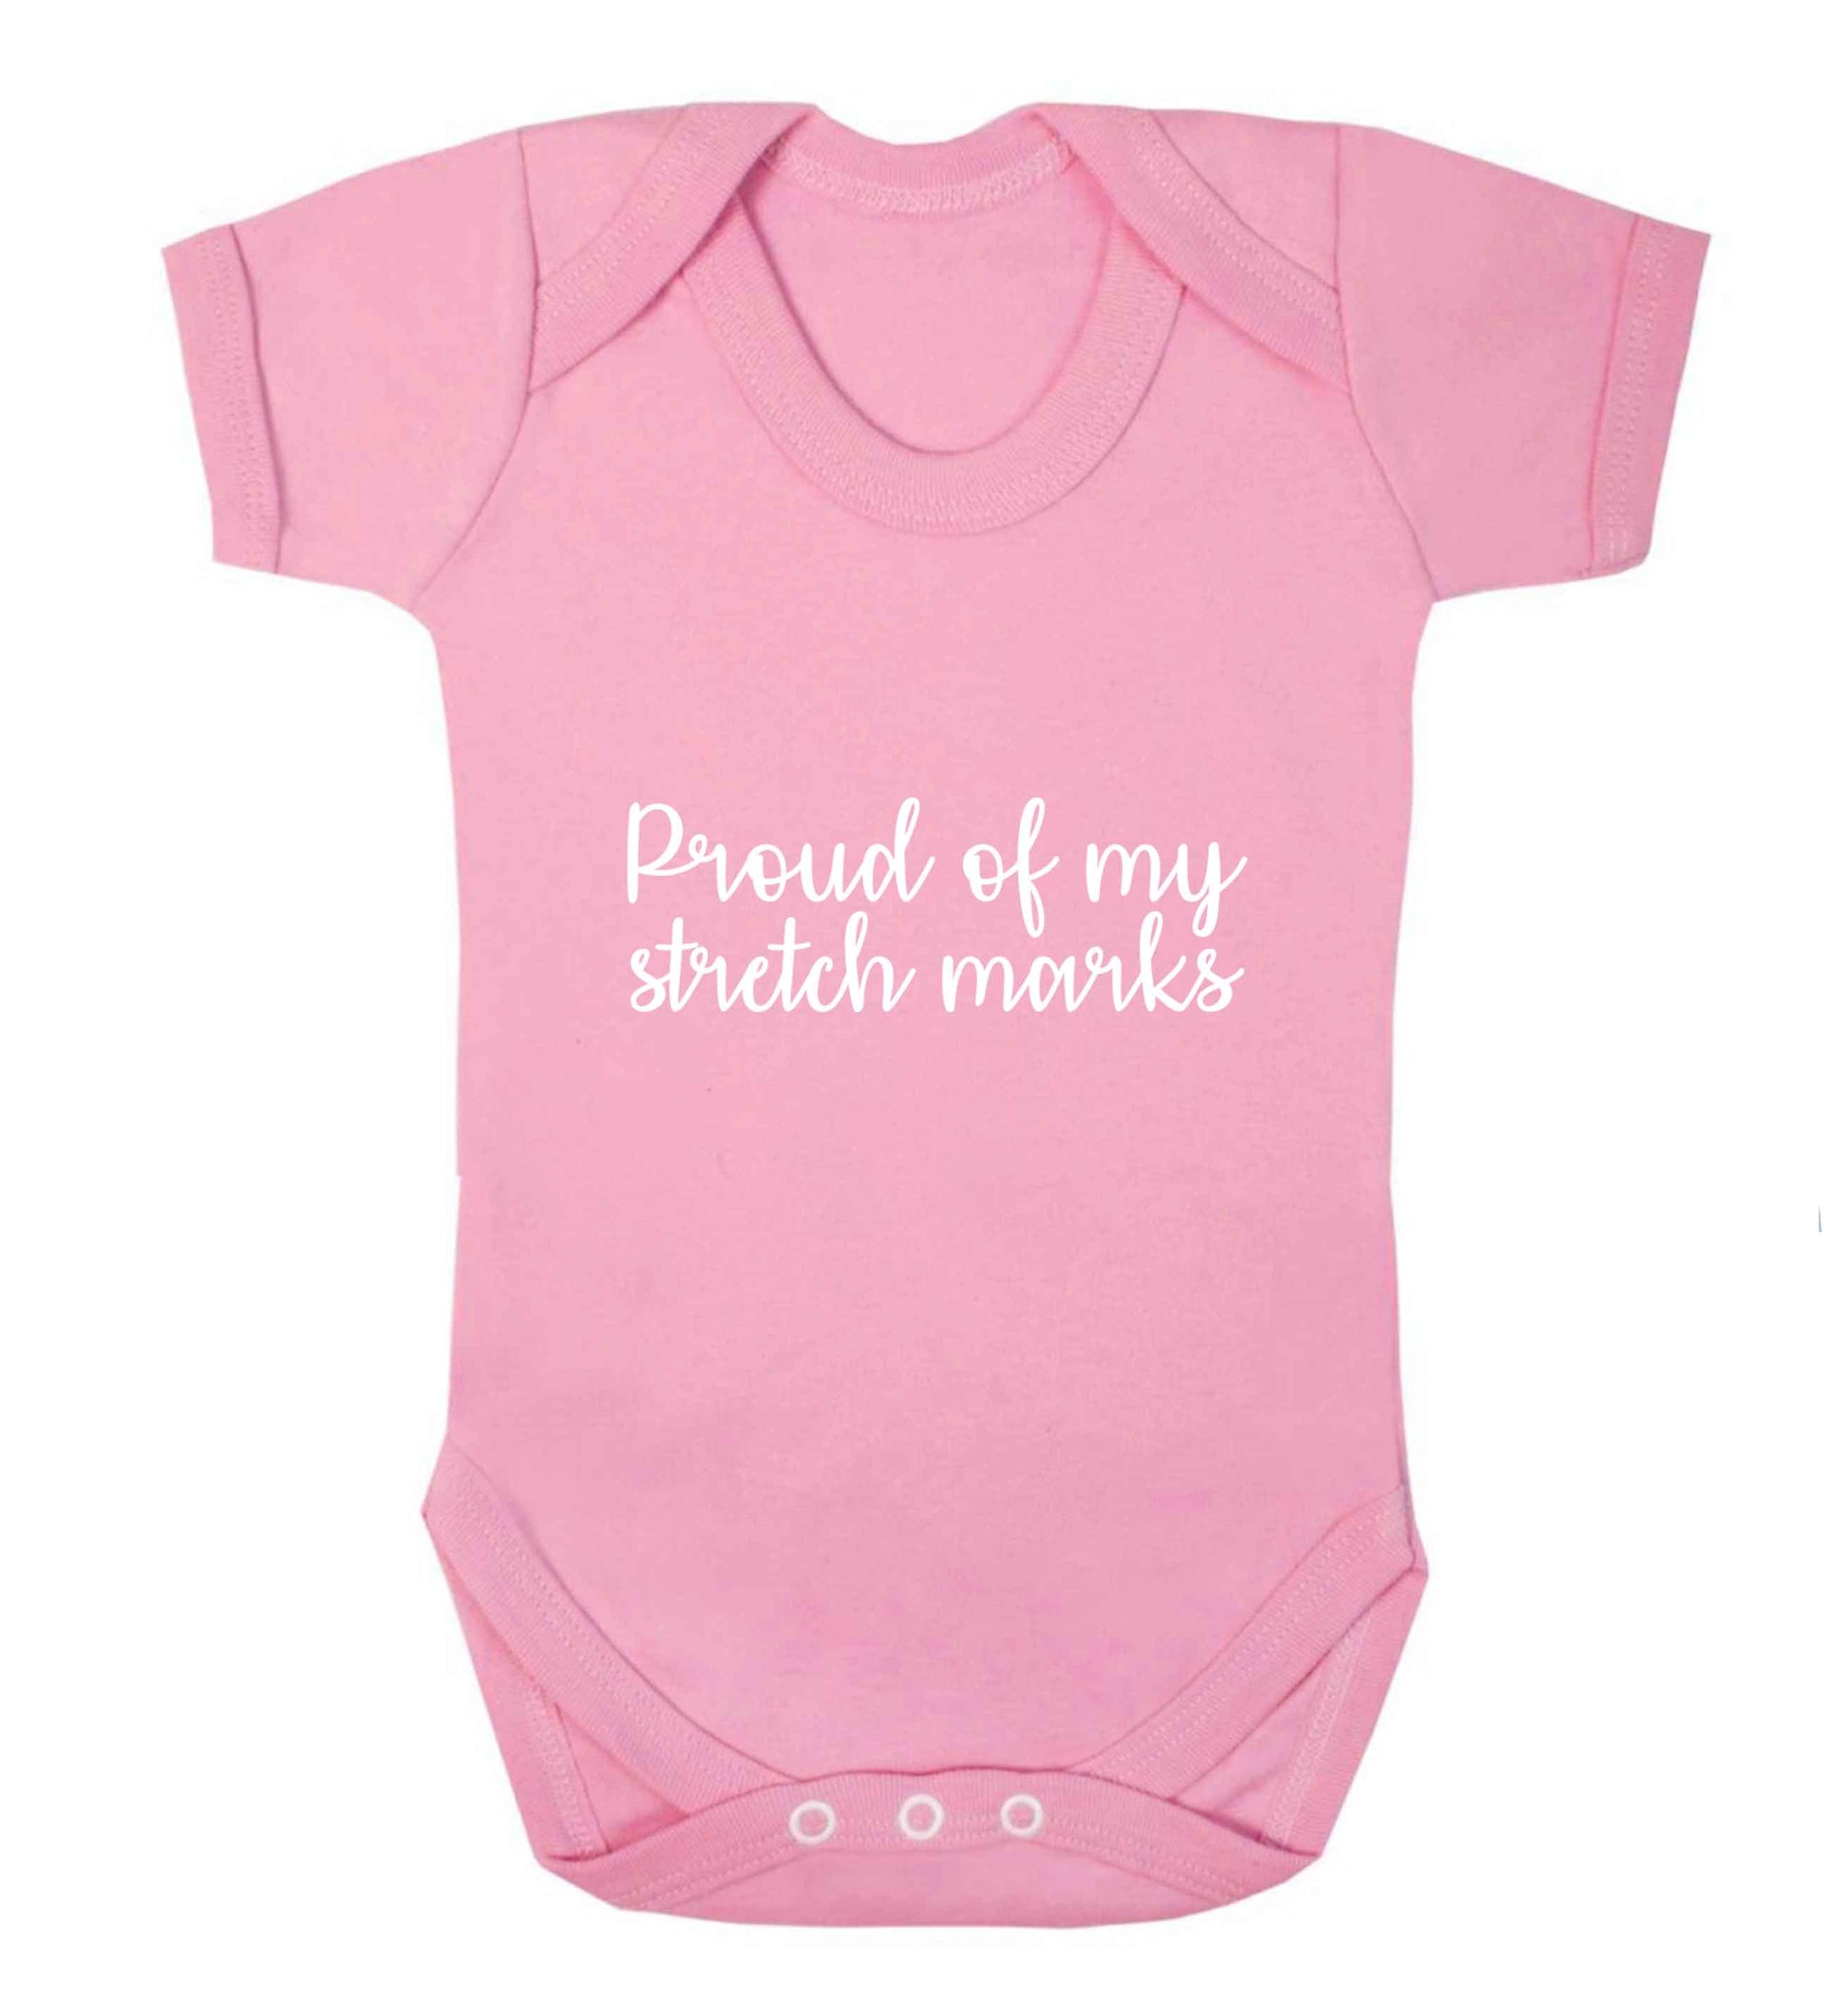 Proud of my stretch marks baby vest pale pink 18-24 months